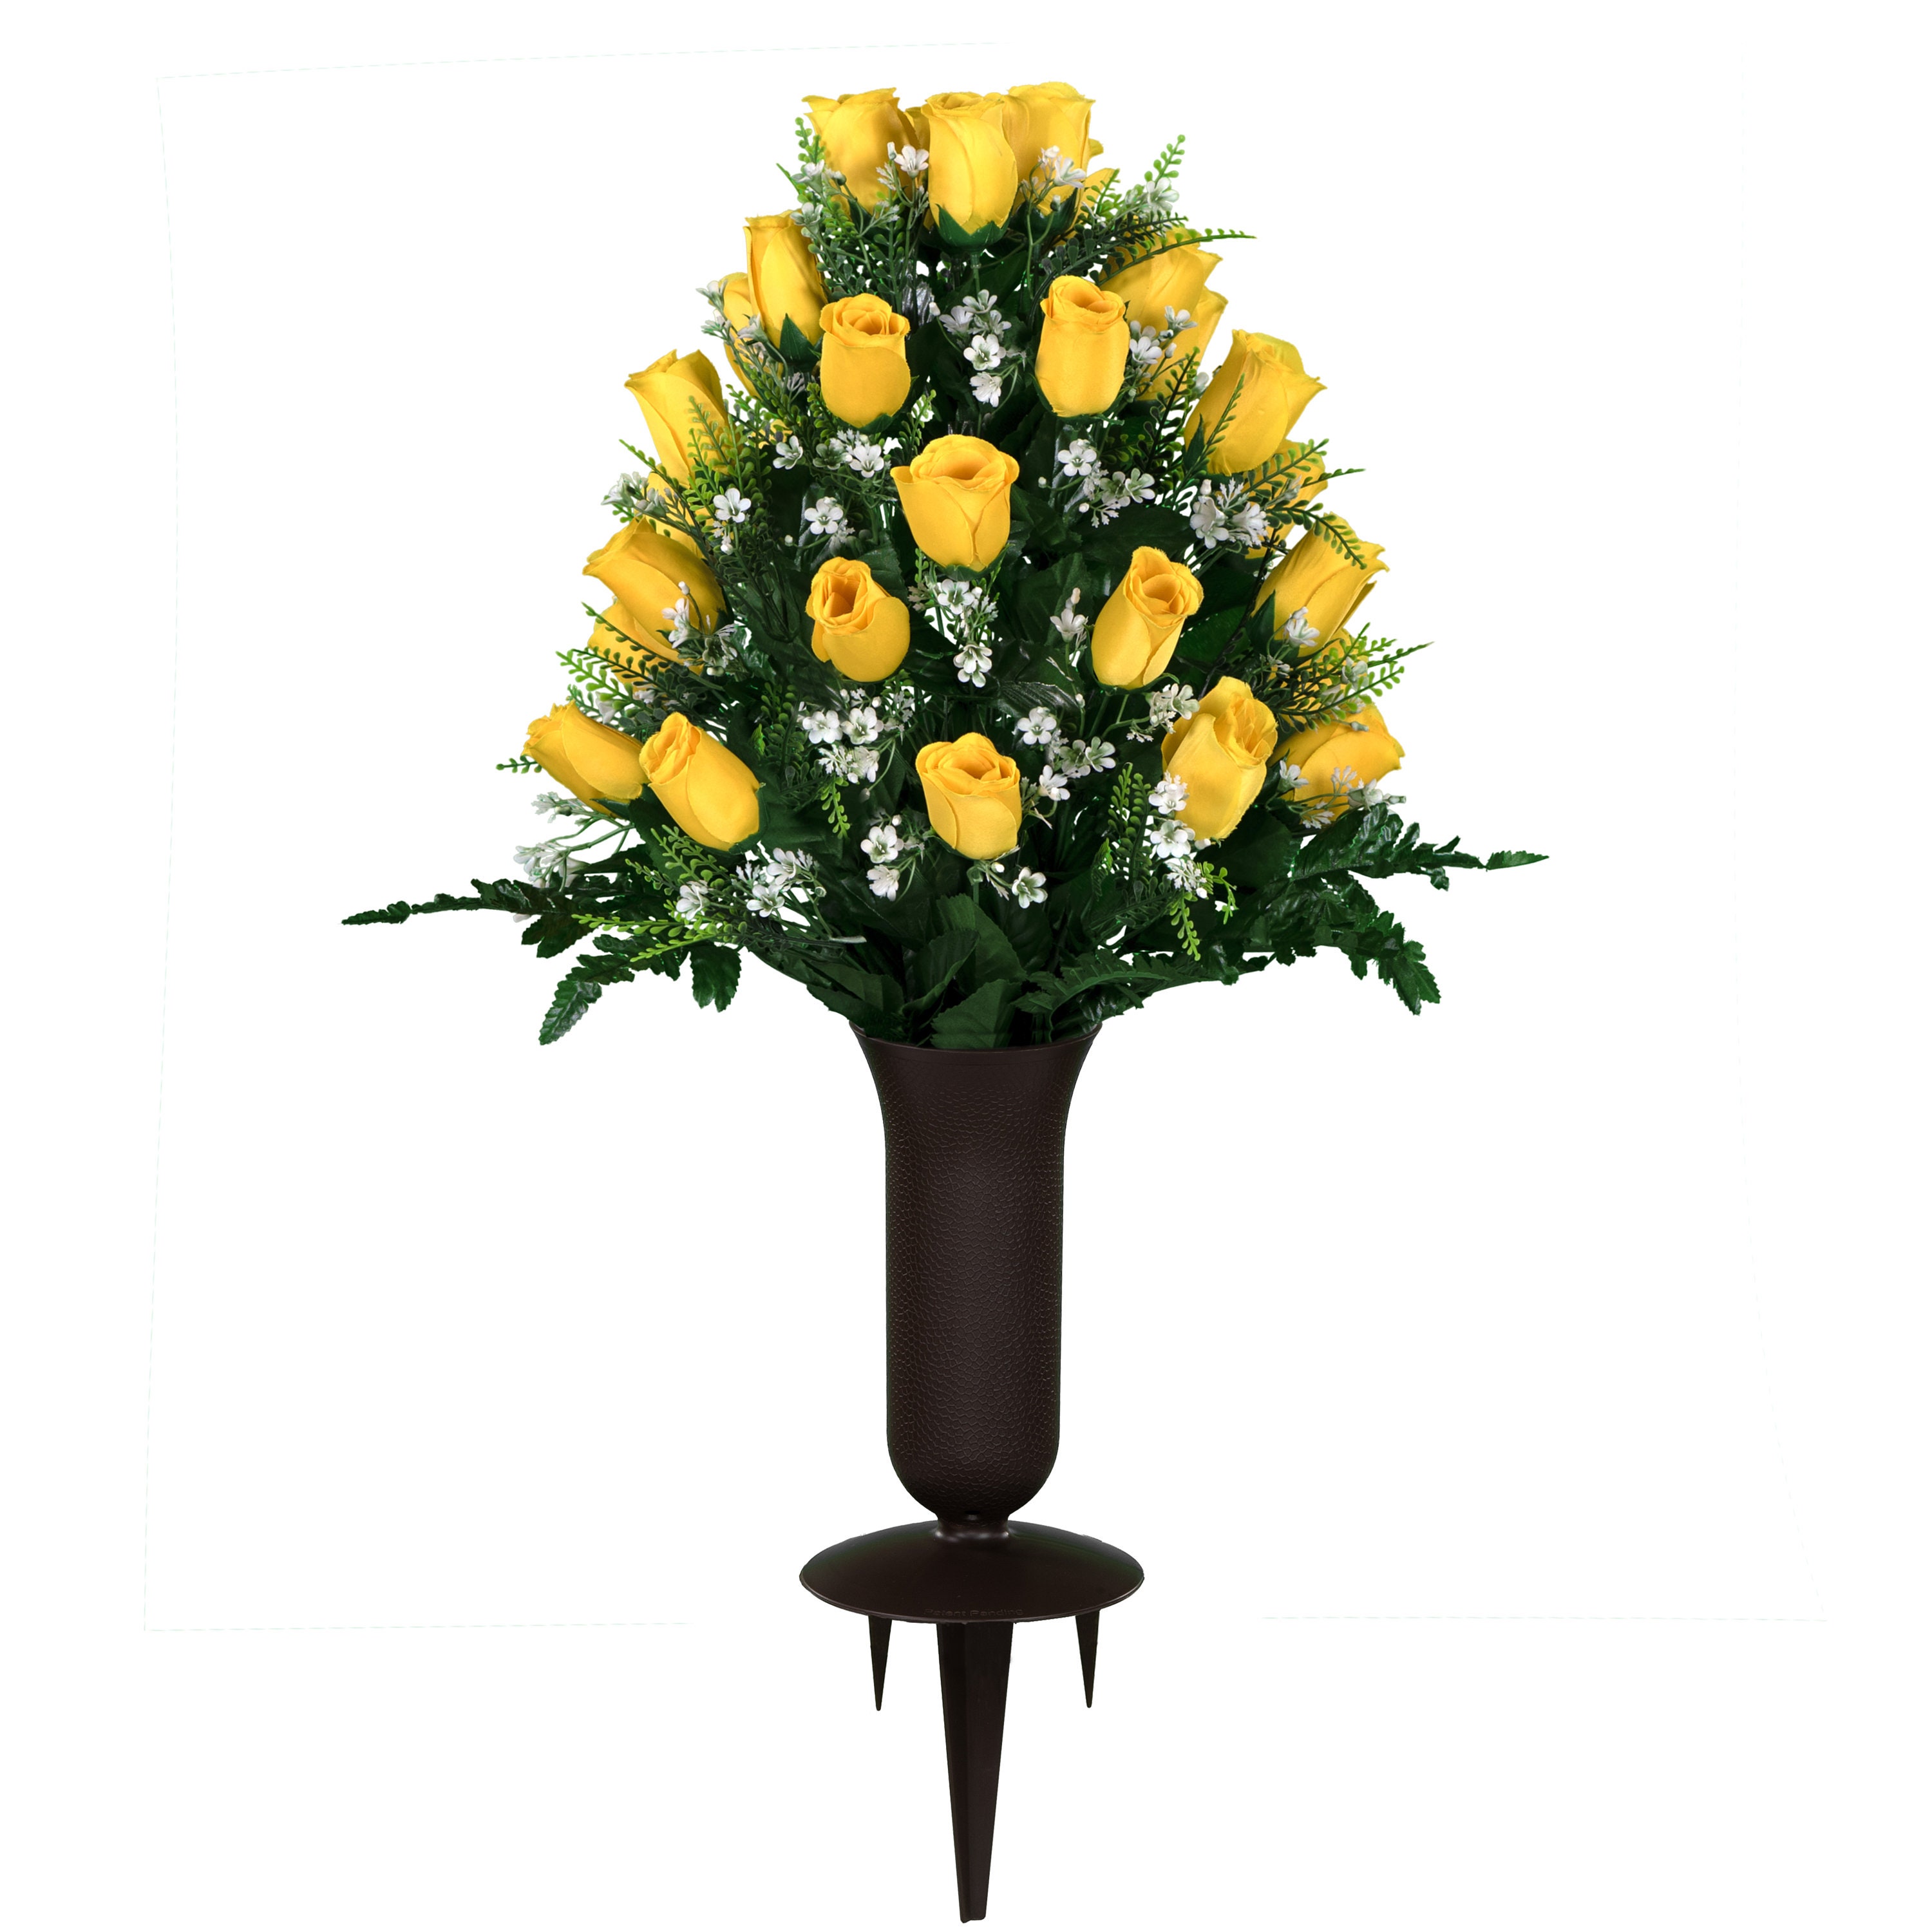 MACTING Artificial Flowers 60pcs Real Looking Gold Yellow Foam Fake Roses  with Stems for DIY Wedding Bouquets Baby Shower Centerpieces Party Tables